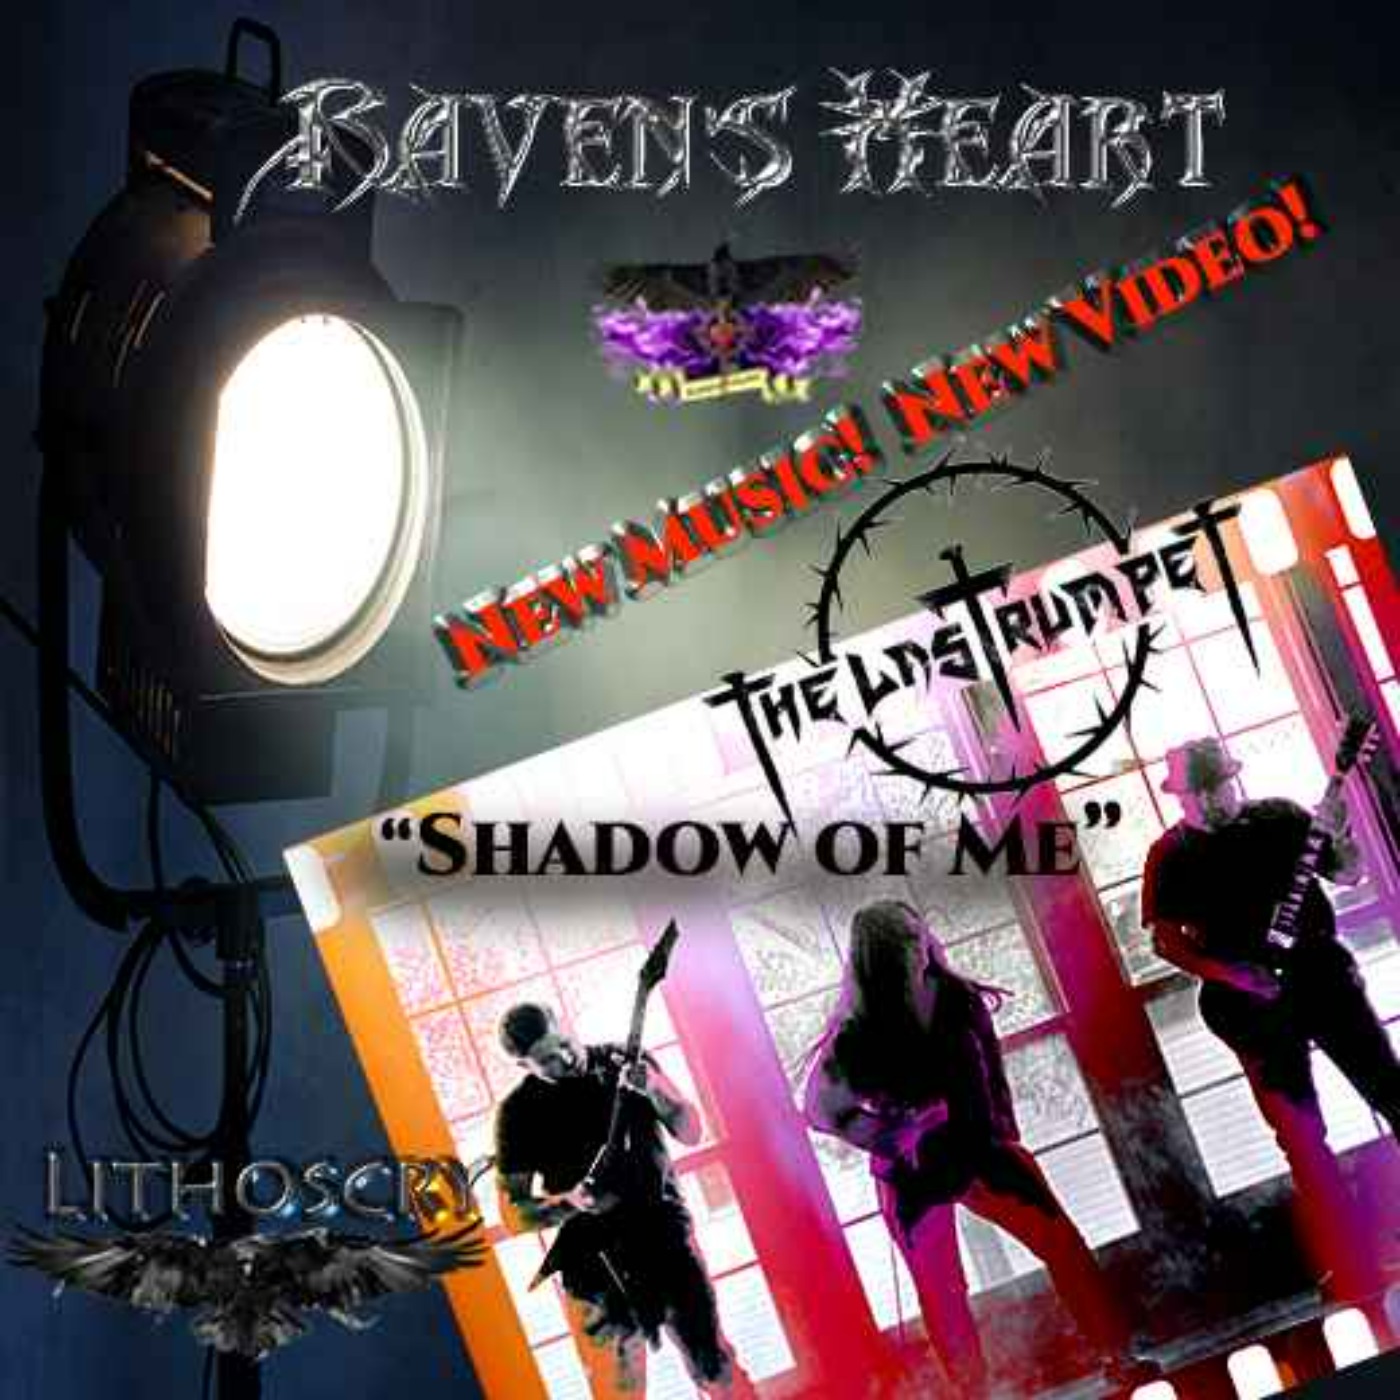 cover art for The lasTrumpet:  New Music!  New Video! "Shadow of Me"